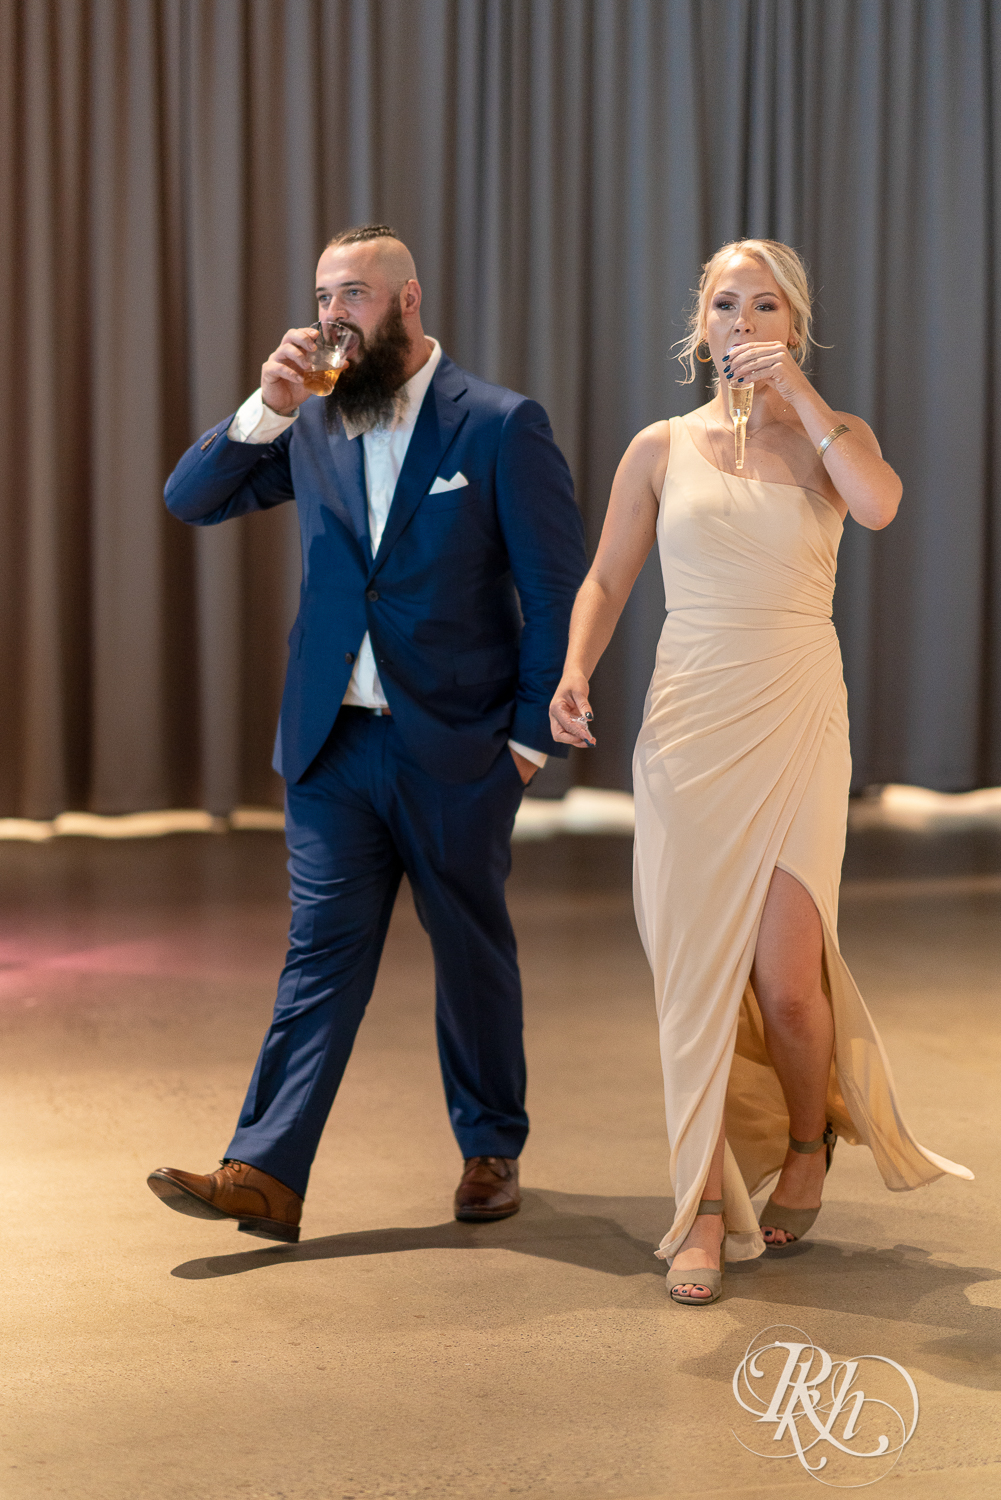 Wedding party walks in during grand entrance at Saint Paul Event Center in Saint Paul, Minnesota.